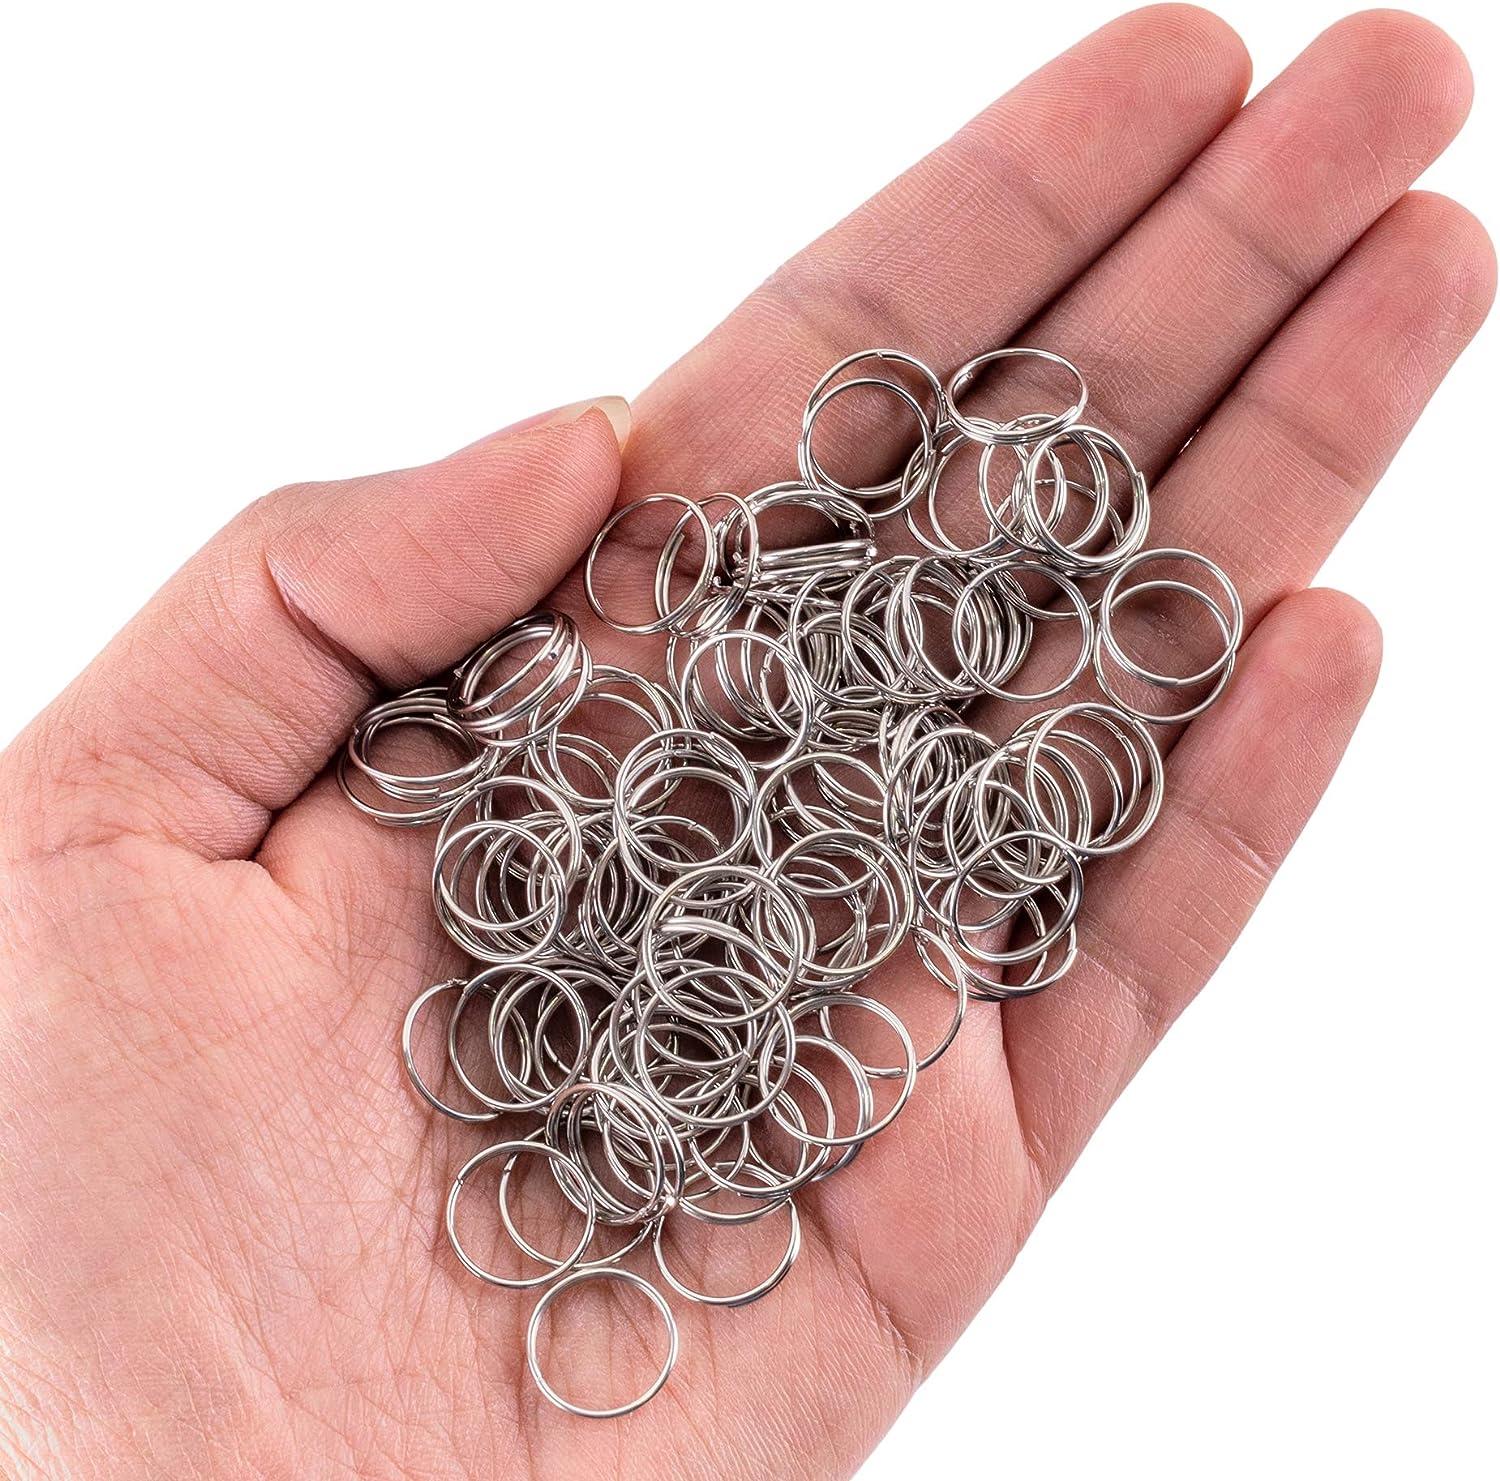 100 Sets Keychain Rings for Crafts, Round Split Key Rings, Metal